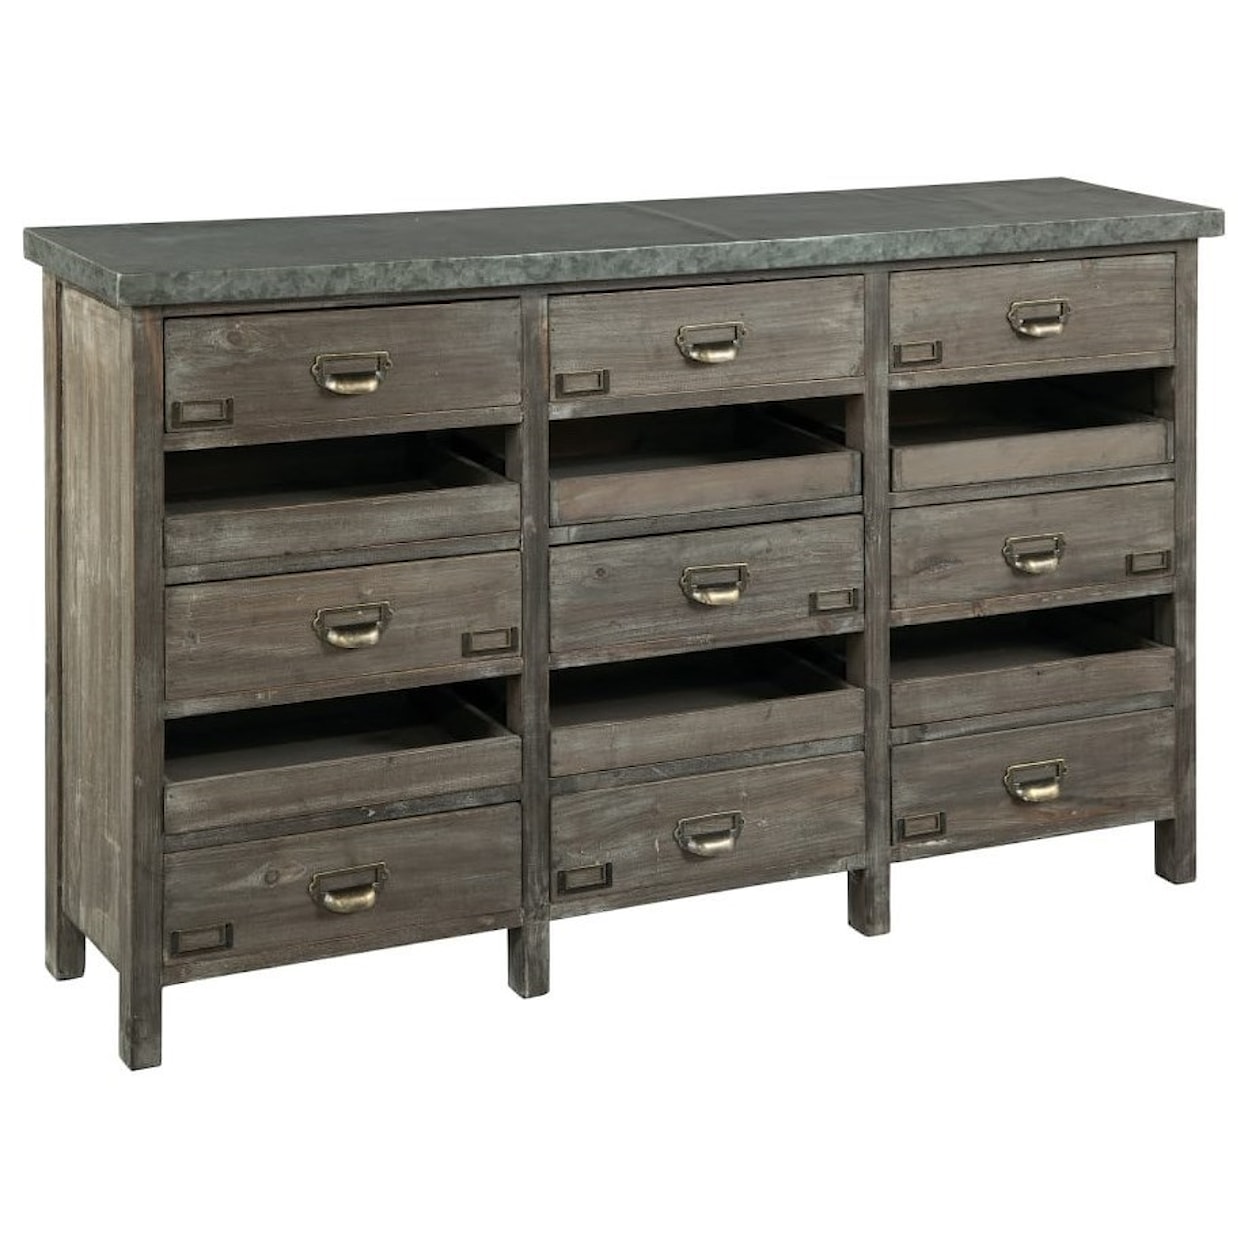 Hekman Marketplace Accents Bin & Drawer Chest